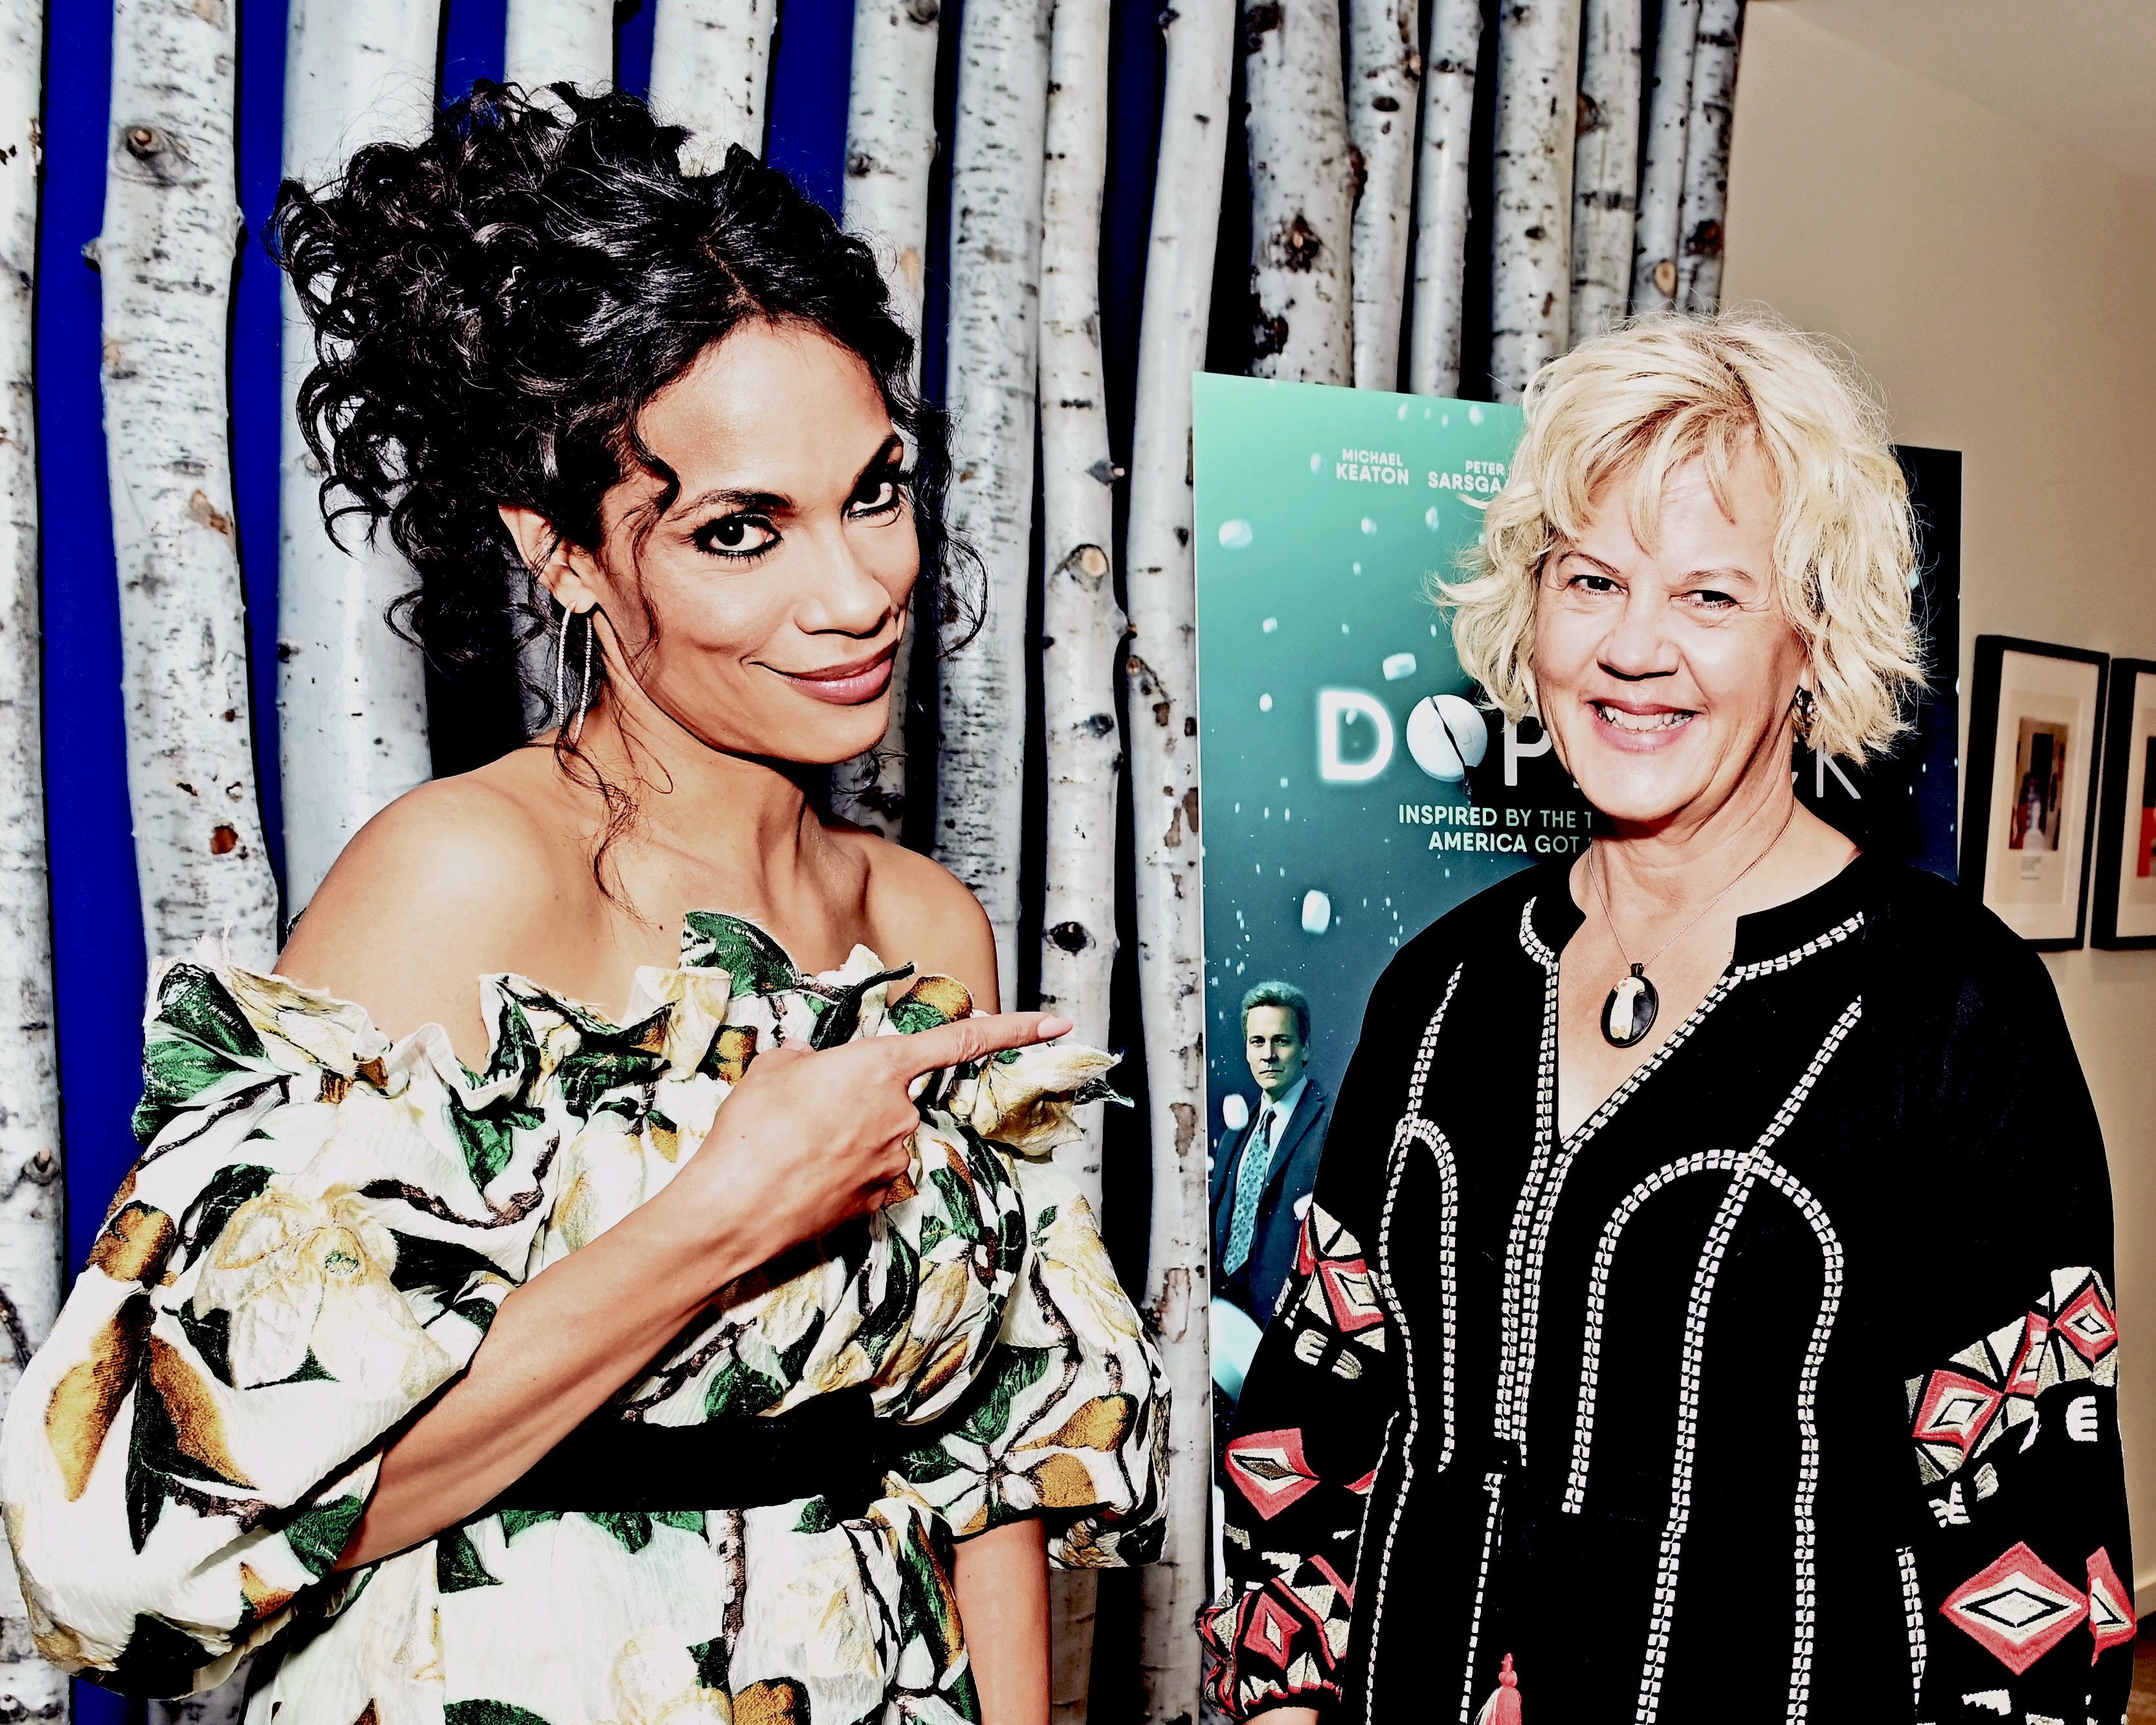 'Dopesick' cast member Rosario Dawson pointing at the author that the Hulu series is based on, Beth Macy